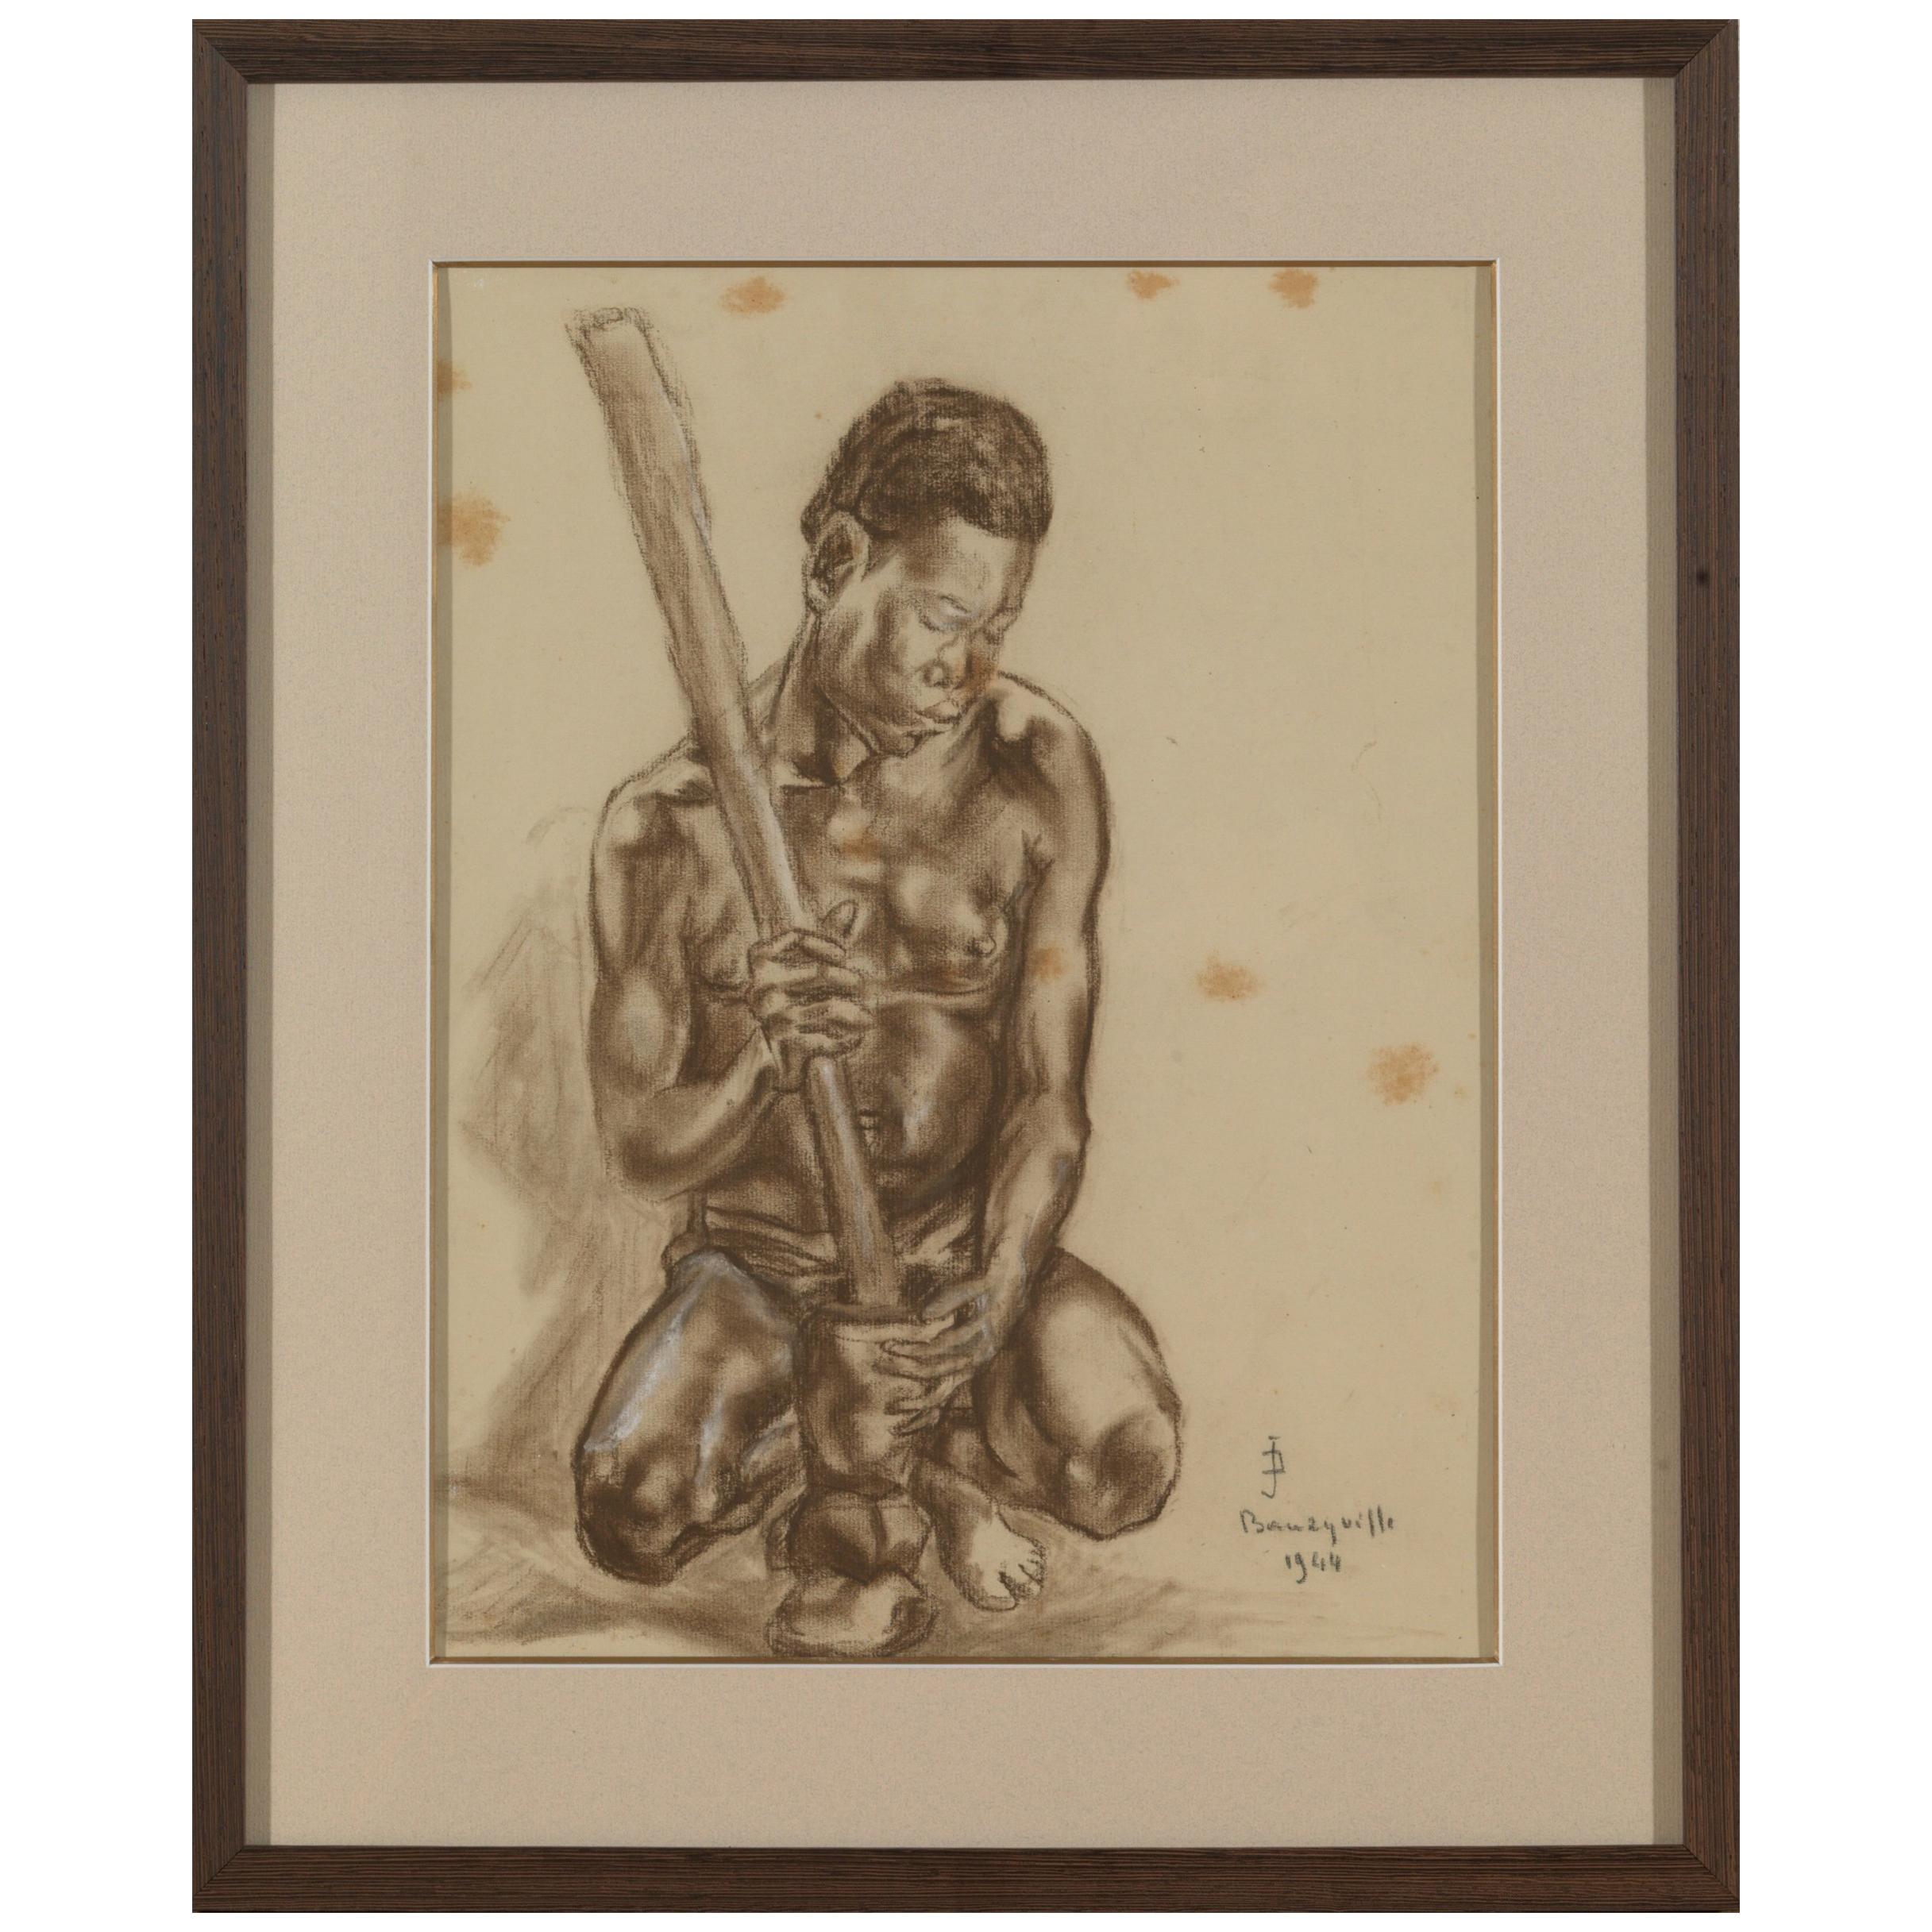 Portait of African Male, Charcoal on Paper, Signed Banzyville, 1944 For Sale